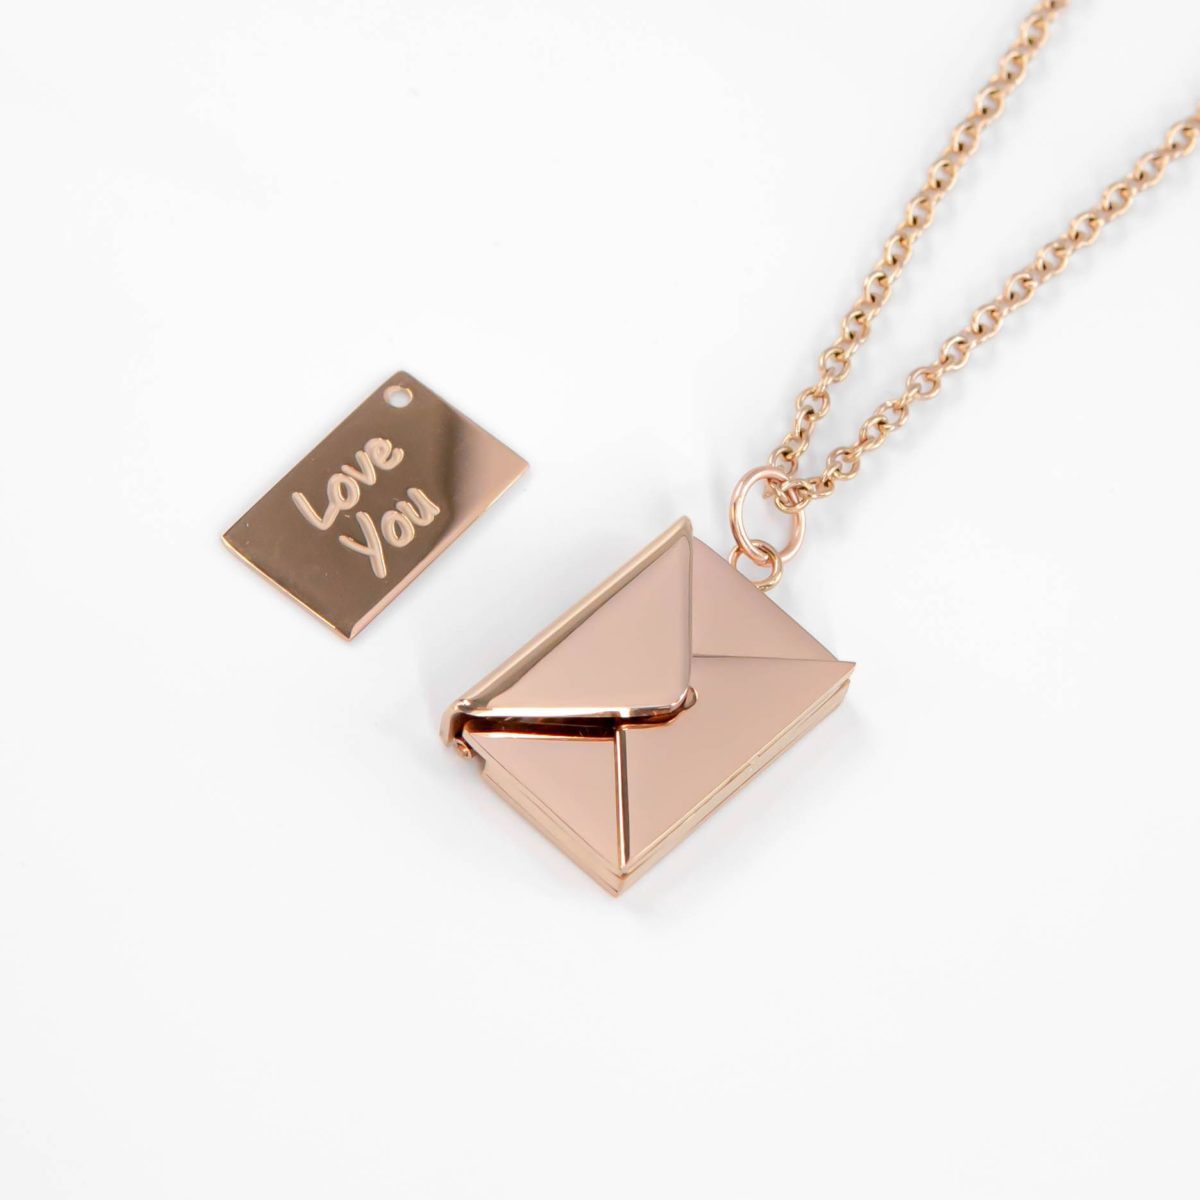 https://m.clubbella.co/product/love-letter-18k-rose-gold-plated-necklace/ Love letter necklace (4)